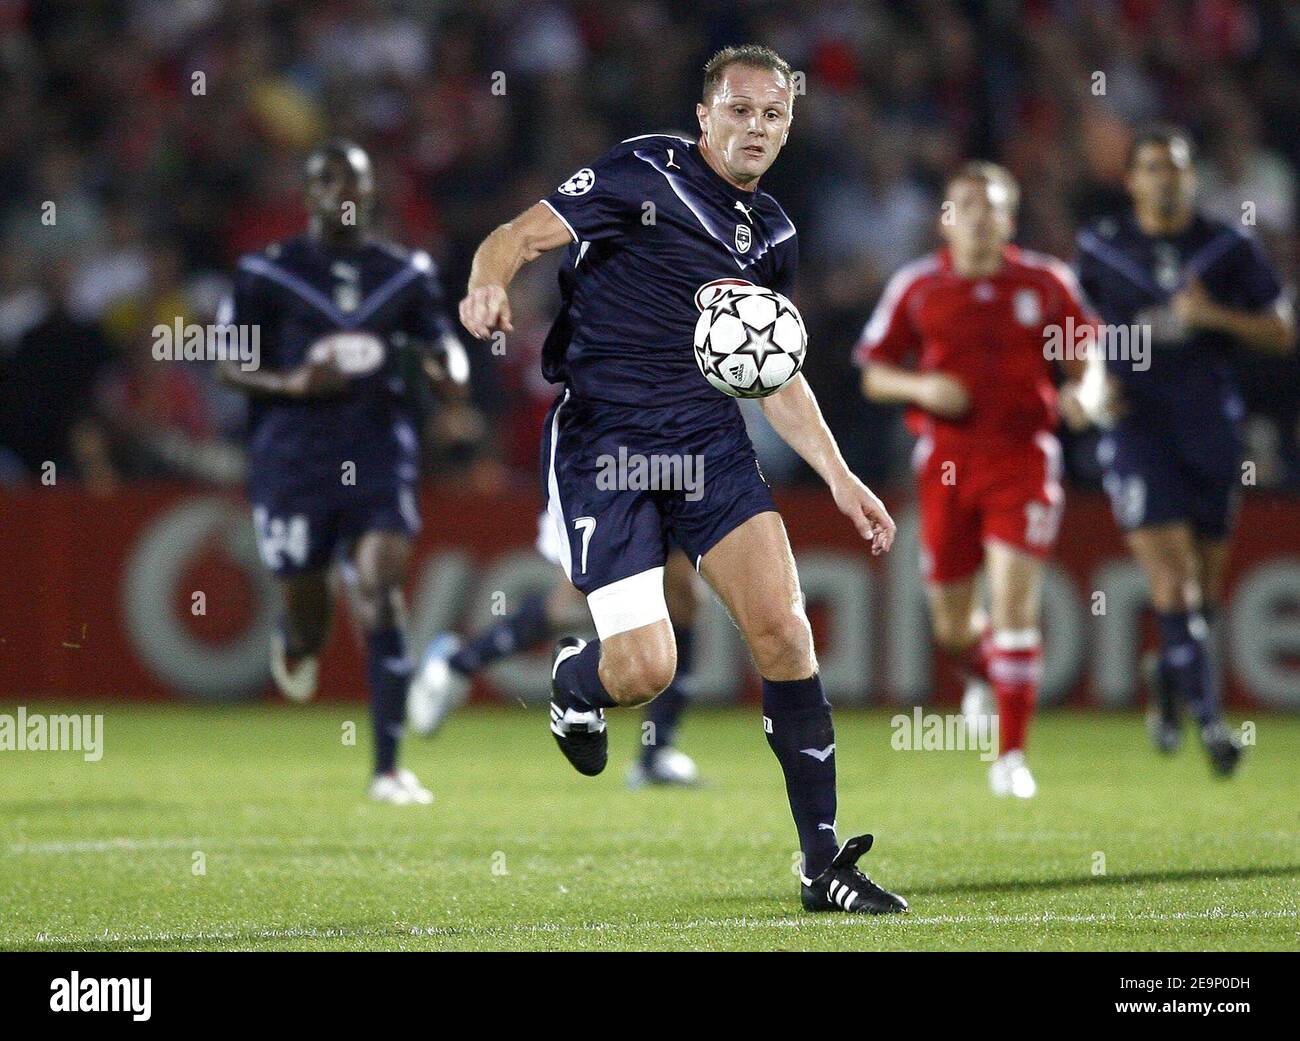 Bordeaux' Lilian Laslandes in action during the UEFA Champions League, Group C, Girondins de Bordeaux vs Liverpool FC at the Stade Chaban-Delmas in Bordeaux, France on October 18, 2006. Liverpool won 1-0. Photo by Christian Liewig/ABACAPRESS.COM Stock Photo